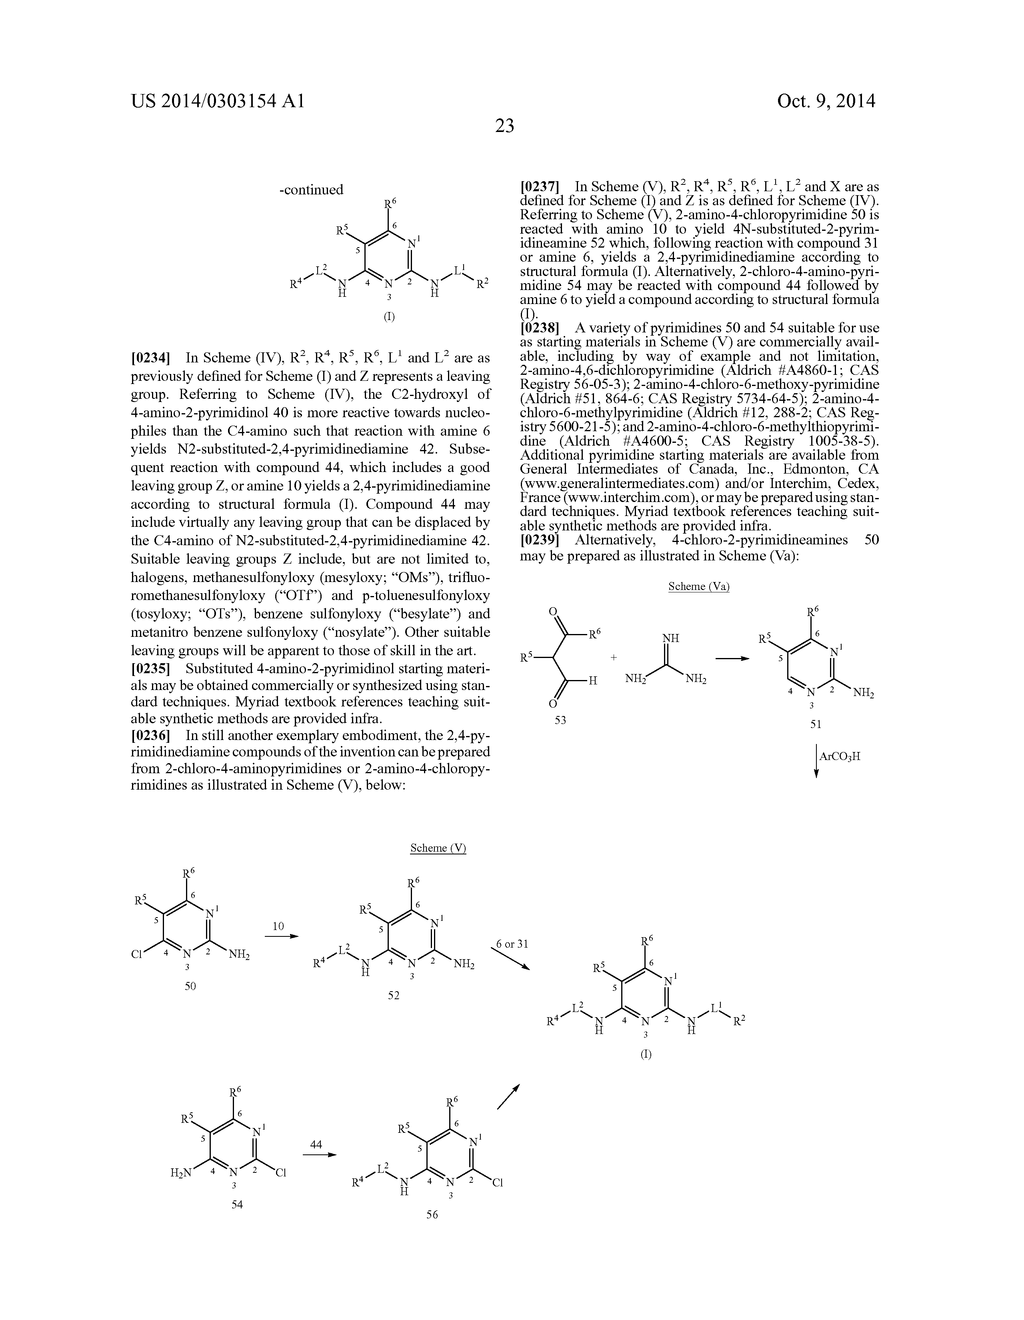 2,4-PYRIDINEDIAMINE COMPOUNDS AND THEIR USES - diagram, schematic, and image 38